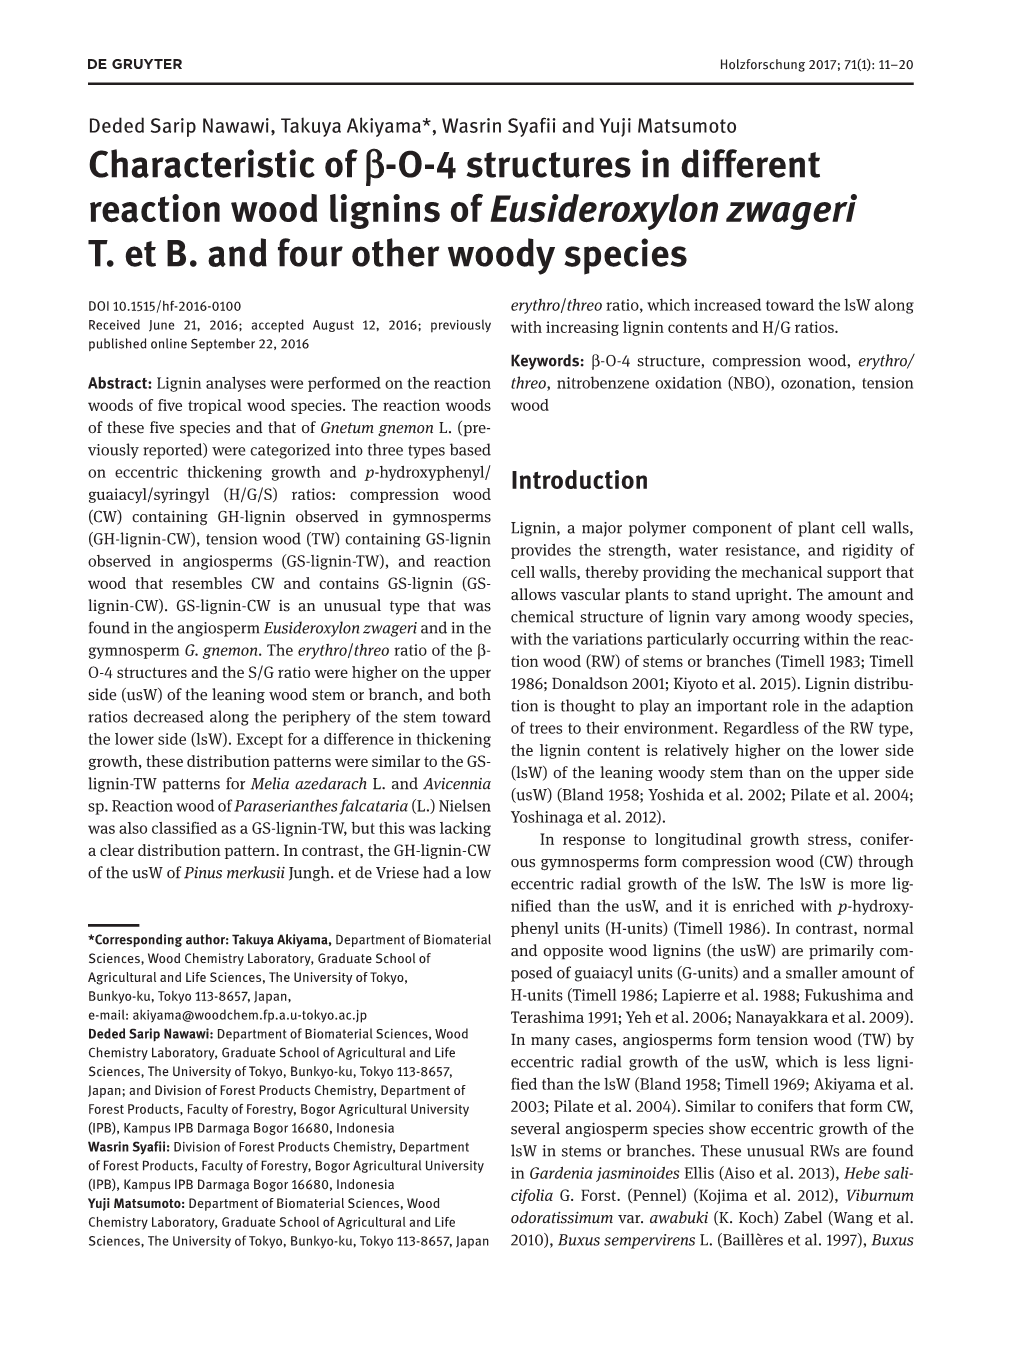 Characteristic of Β-O-4 Structures in Different Reaction Wood Lignins of Eusideroxylon Zwageri T